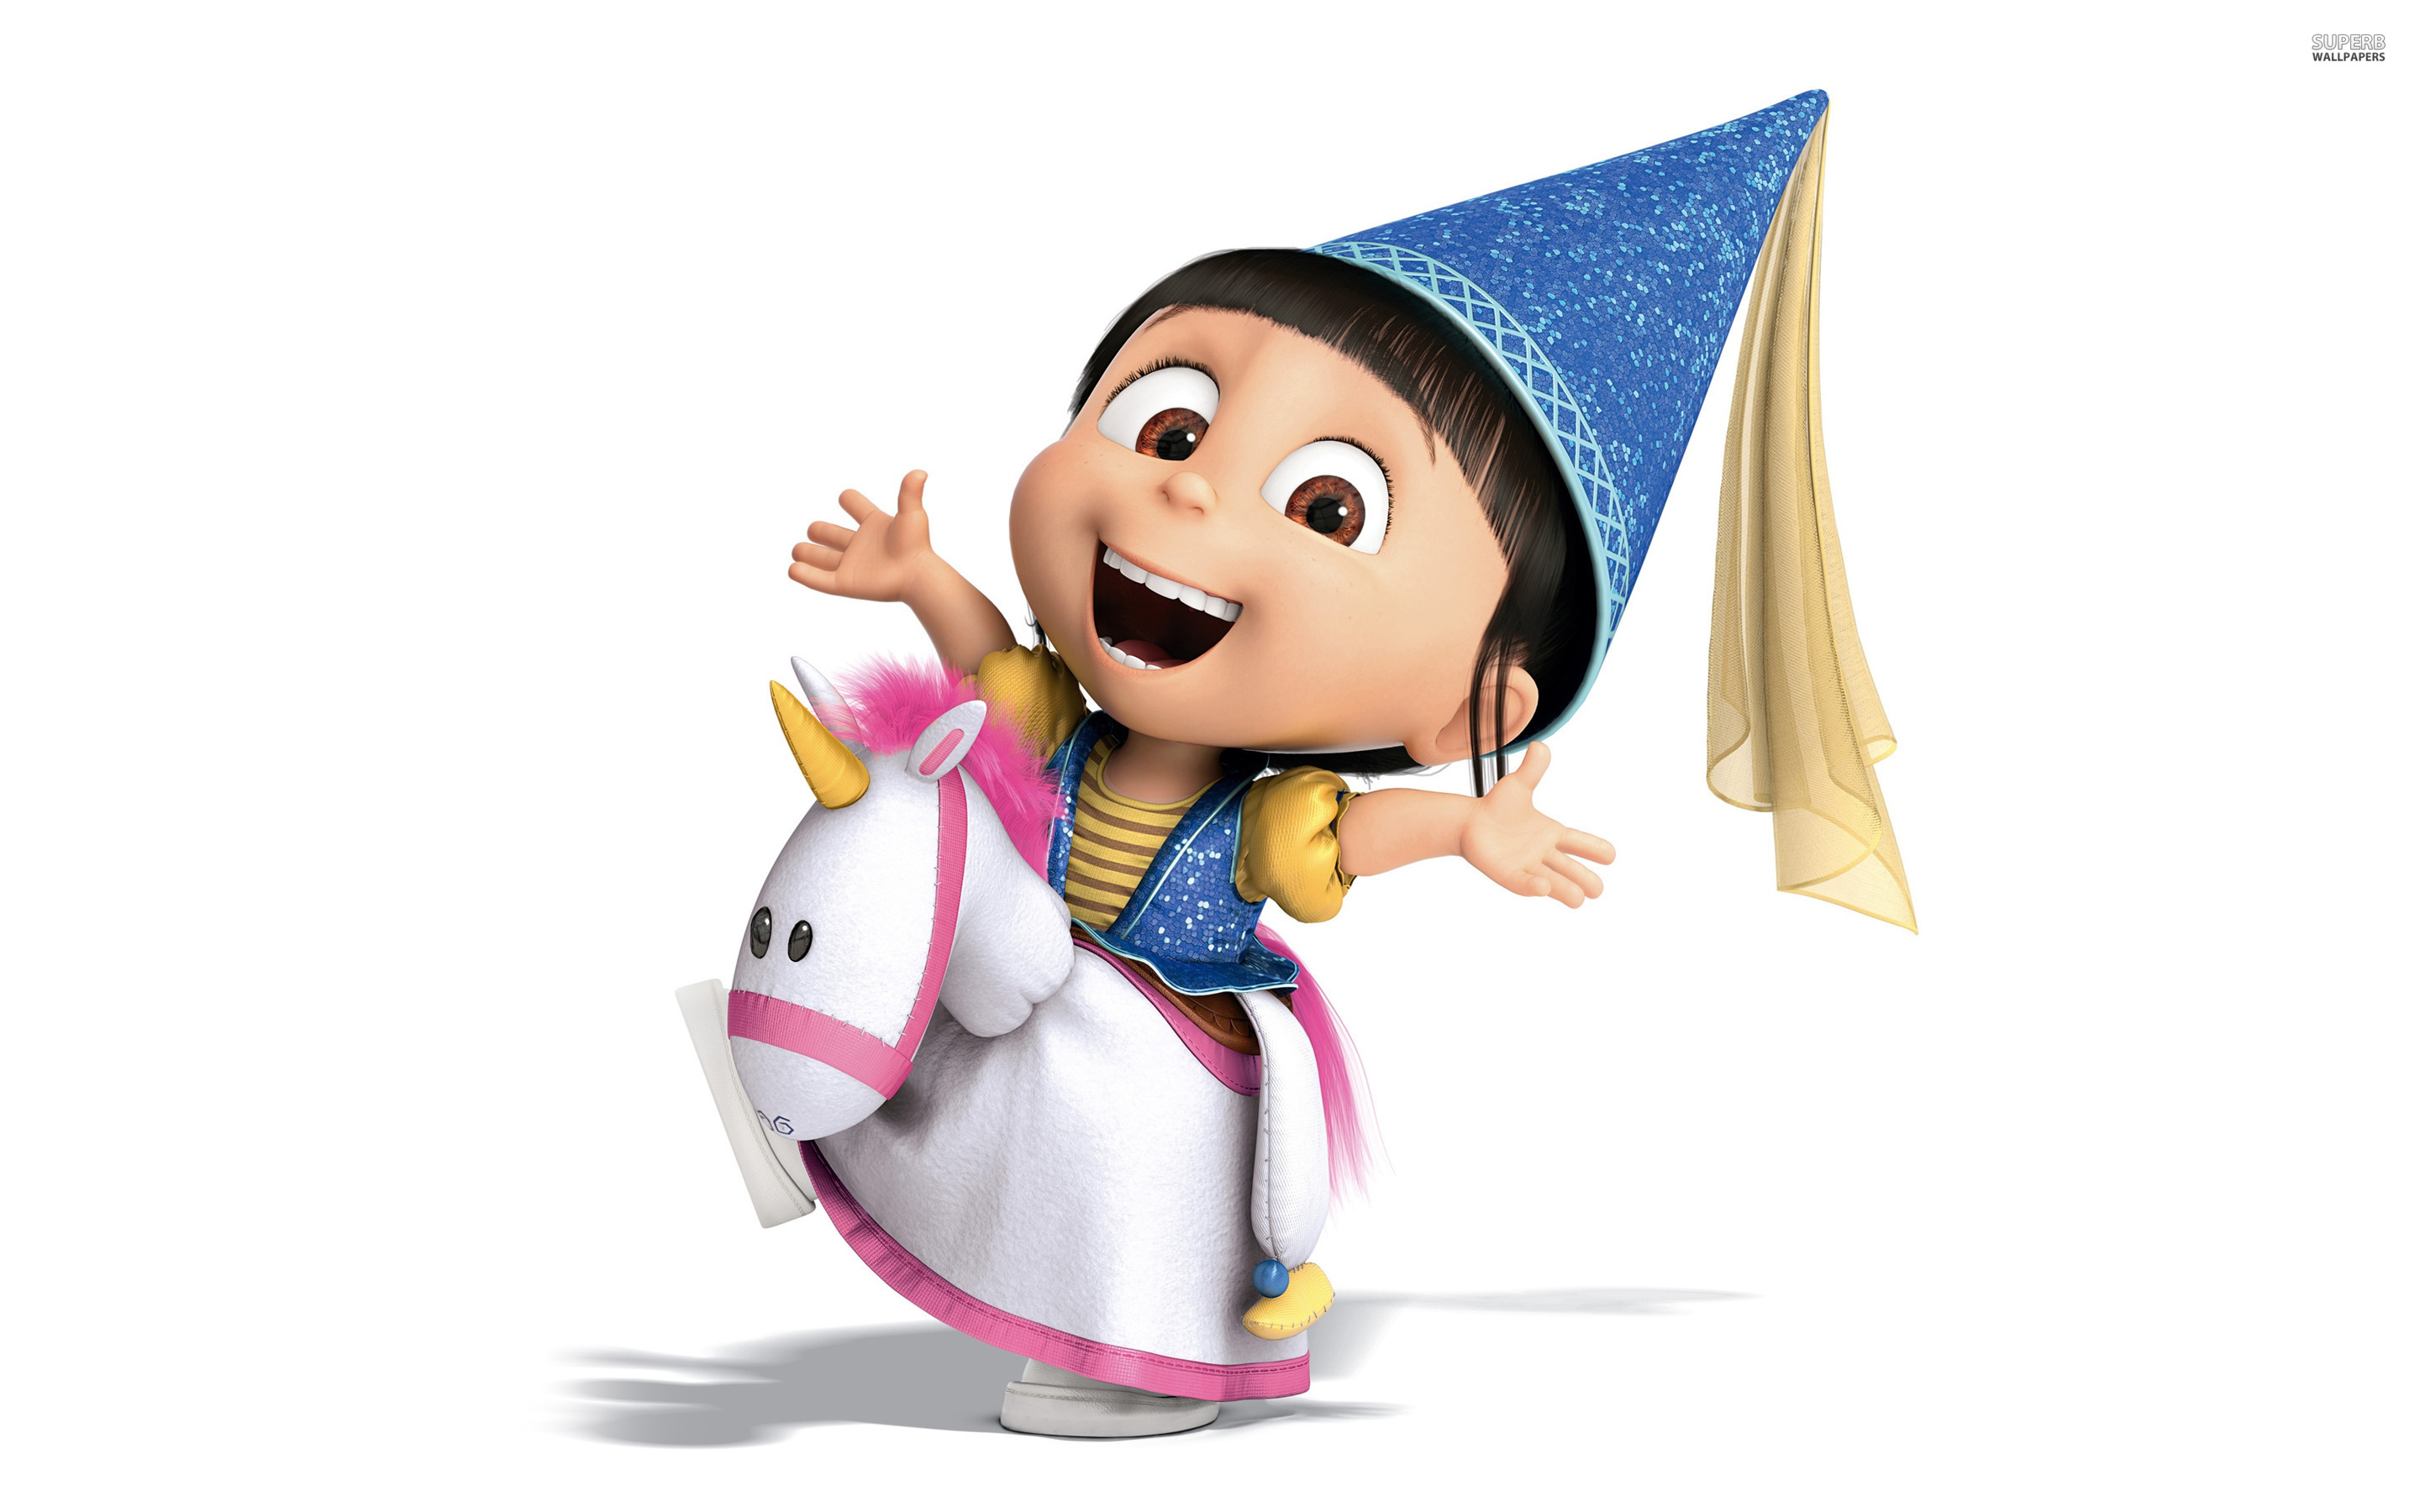 despicable me wallpaper agnes Free cliparts that you can download